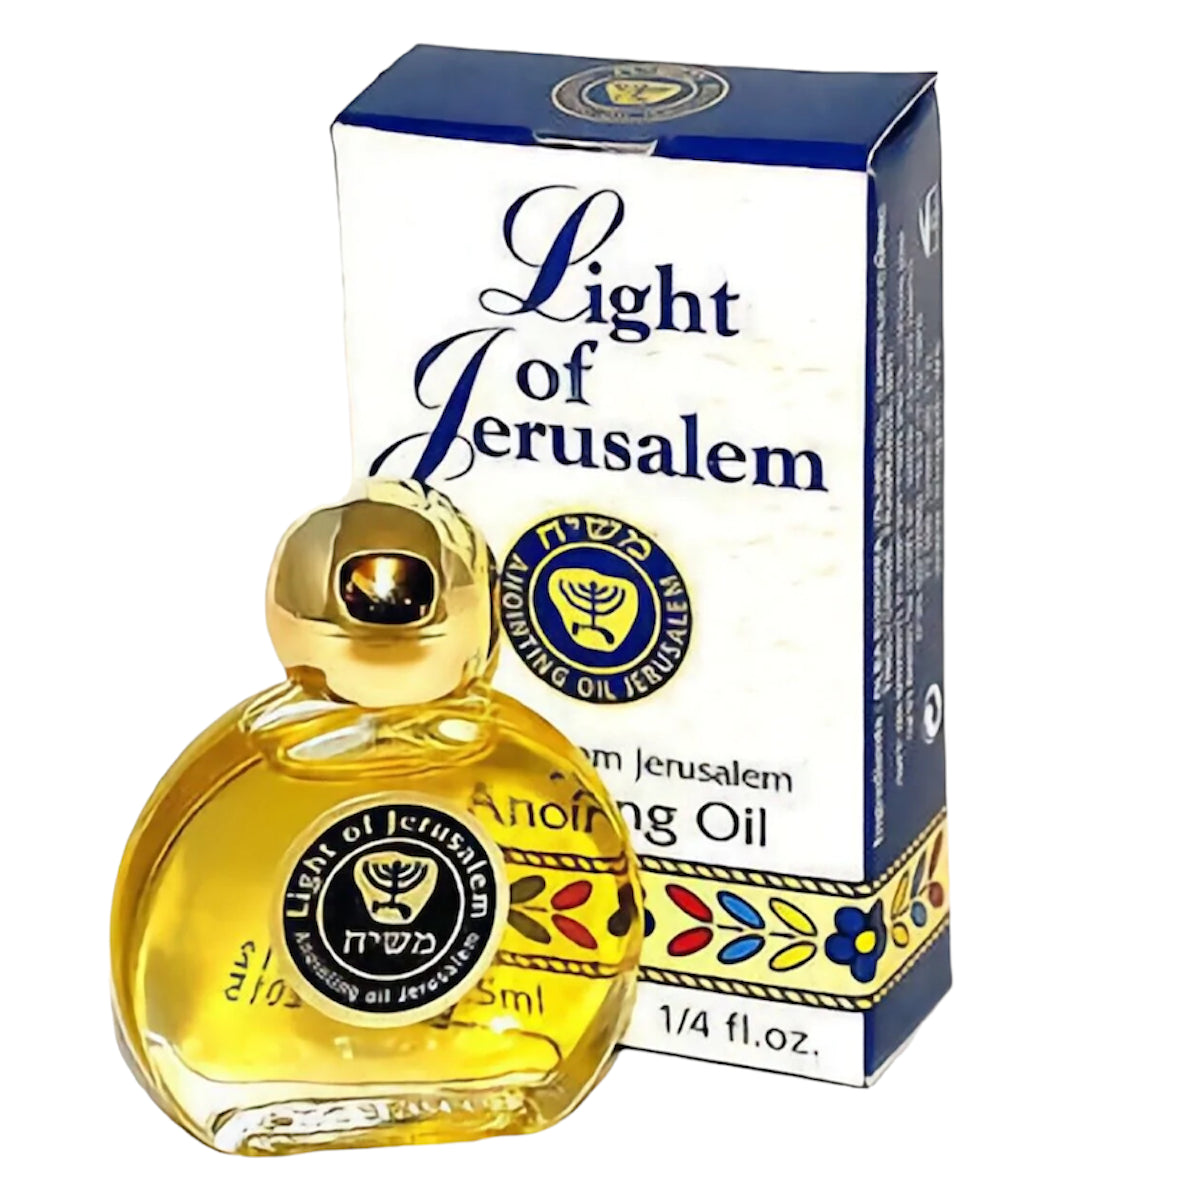 Light of Jerusalem Anointing Oil 7.5 ml / 0.25 fl.oz. From The Holy land